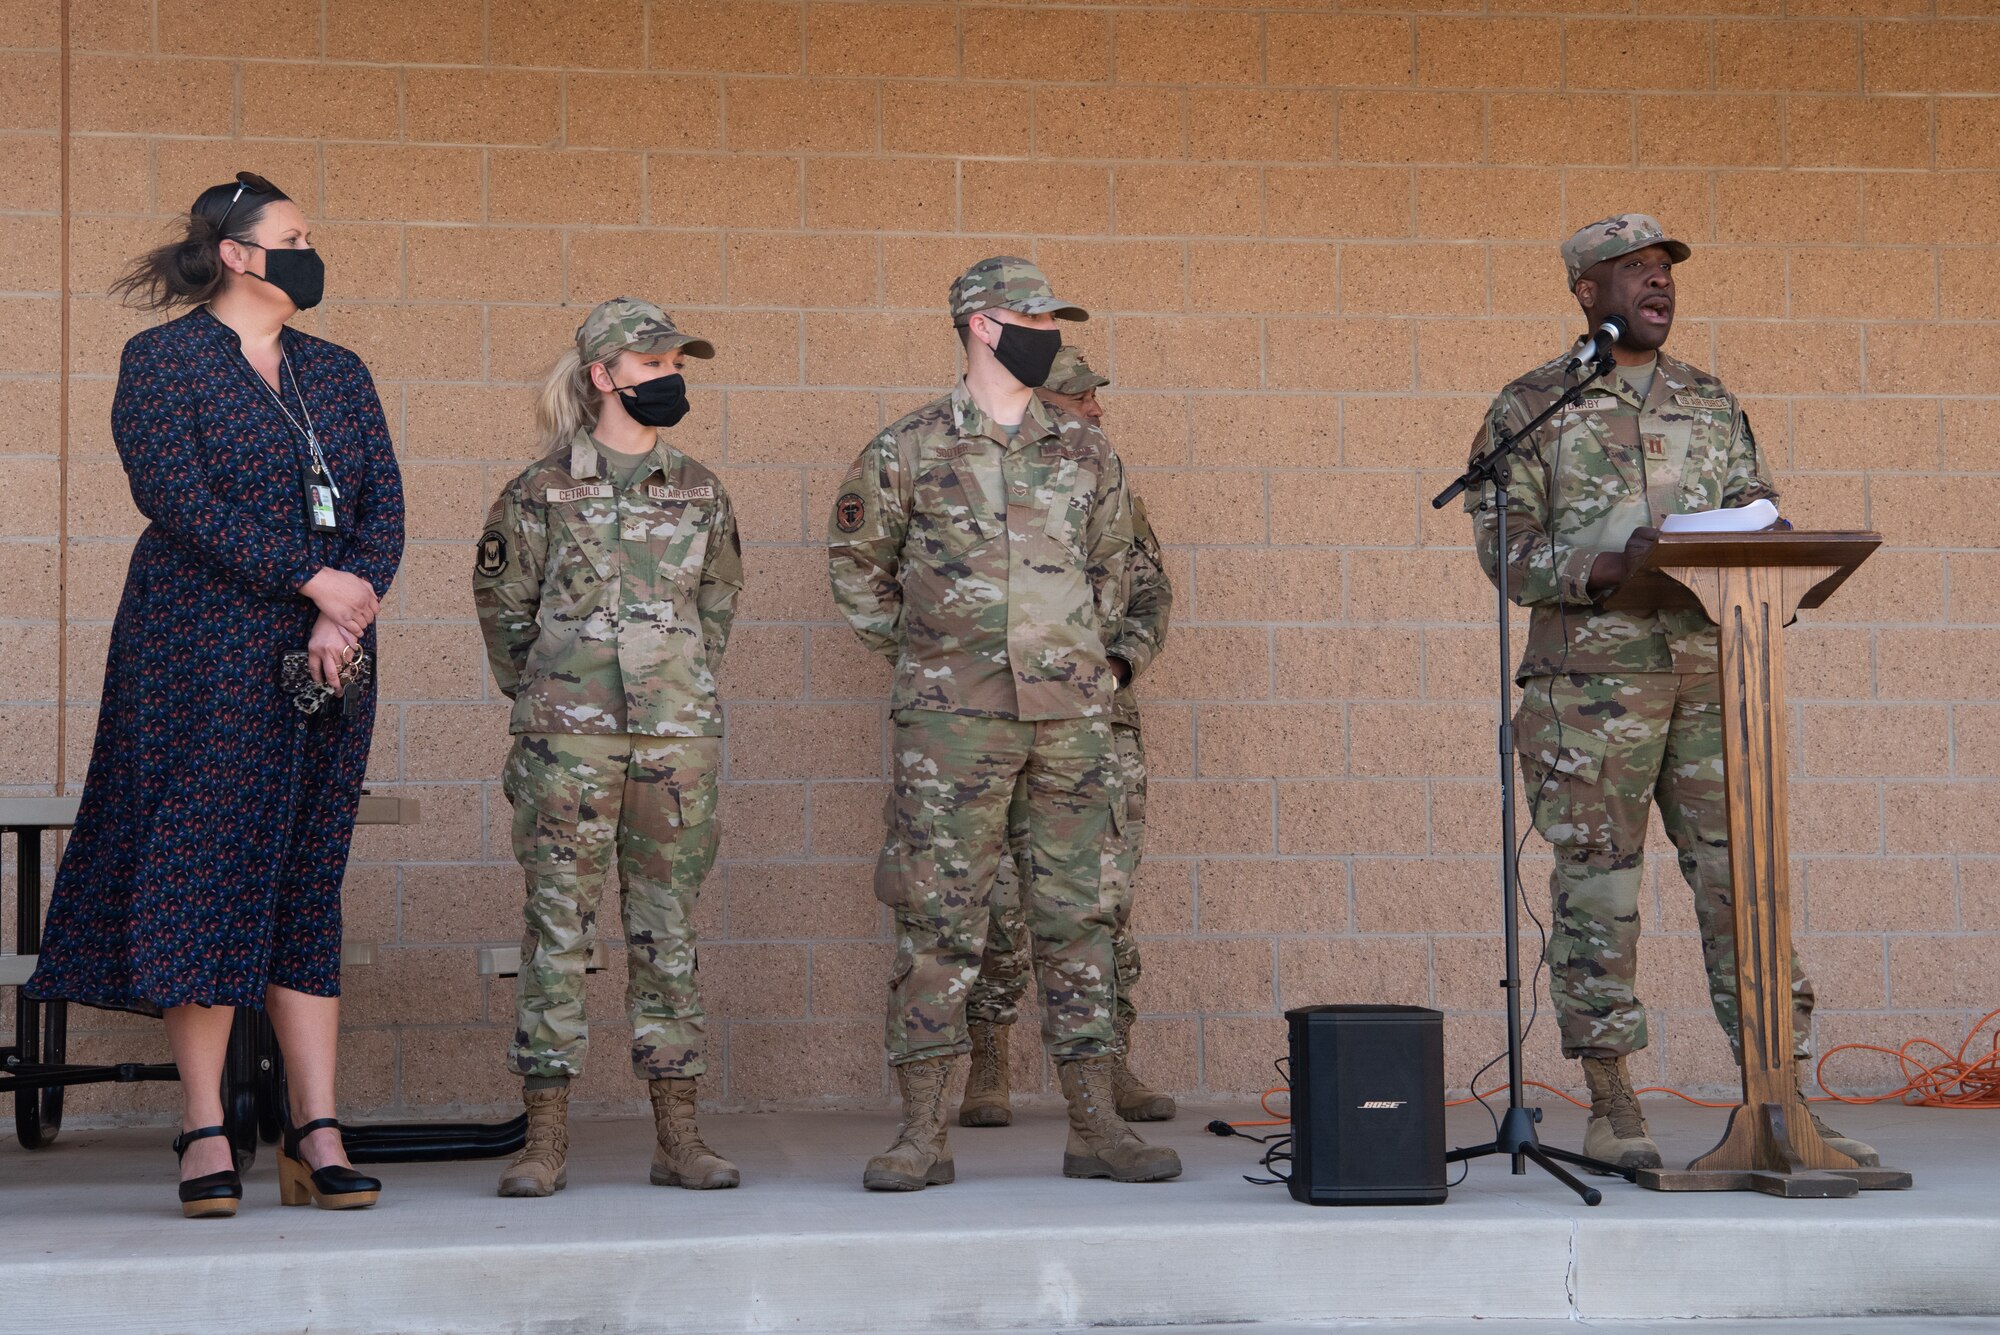 Capt. Arthur Darby II (right), a chaplain assigned to the 27th Special Operations Wing, recognizes Airman 1st Class James Sooter (center right), a maintainer assigned to the 27th Special Operations Aircraft Maintenance Squadron , Airman 1st Class Katheryn Cetrulo (center left), 27th Special Operations Force Support Squadron, and Bianca Daugherty, a civilian at the base chapel, for their assistance in establishing the Airmen Ministry Center on Cannon Air Force Base, N.M., Nov. 17, 2021. The Airmen Ministry Center was established to build spiritually resilient Airmen at Cannon by developing an authentic community, promoting servant leadership, and providing service to others. (U.S. Air Force photo by Airman 1st Class Alexis Sandoval)